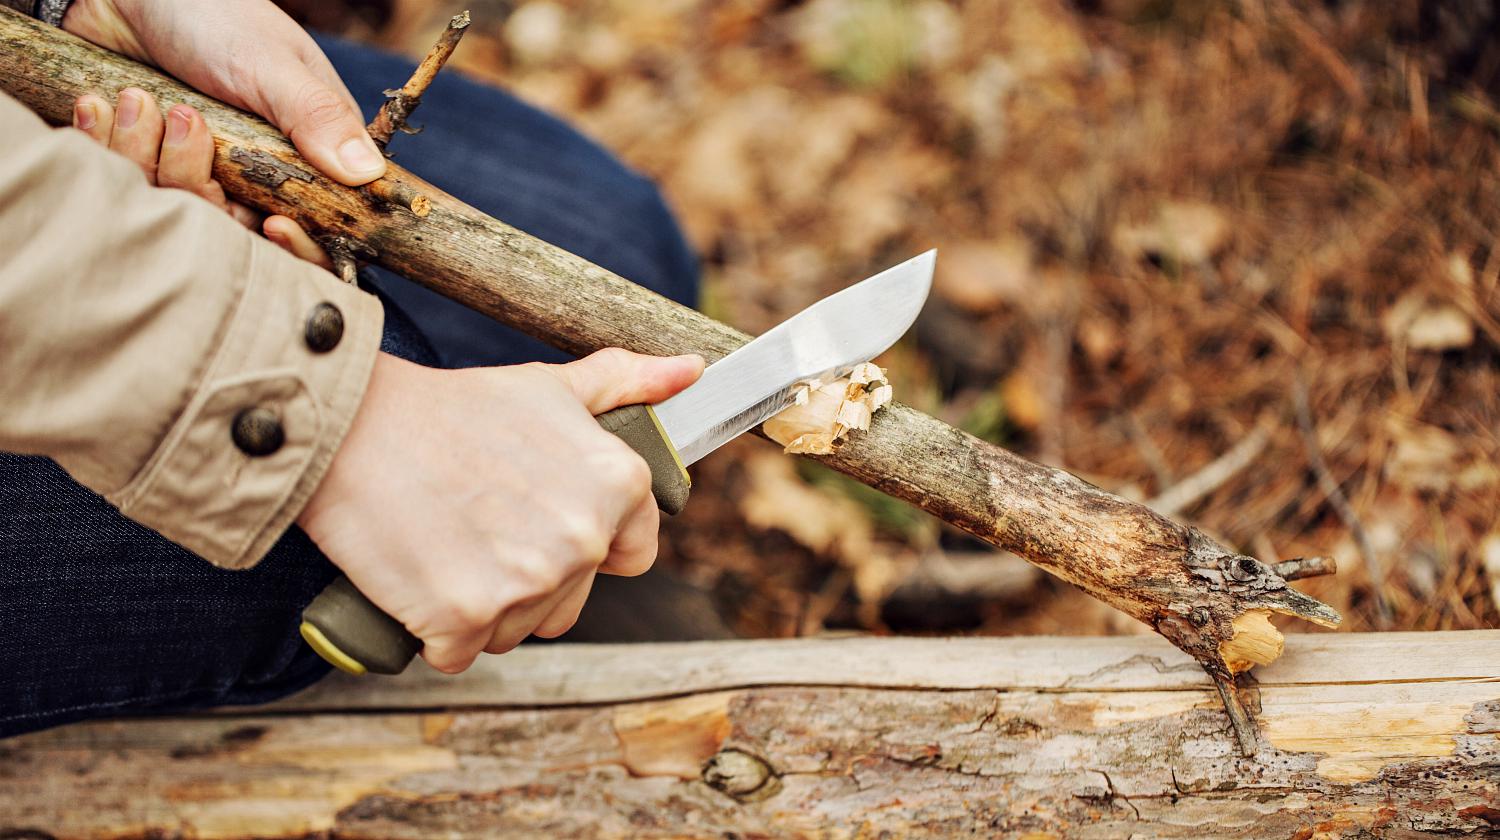 Feature | Man cuts a stick a knife in the woods | Obscure Bushcraft Skills For Survival